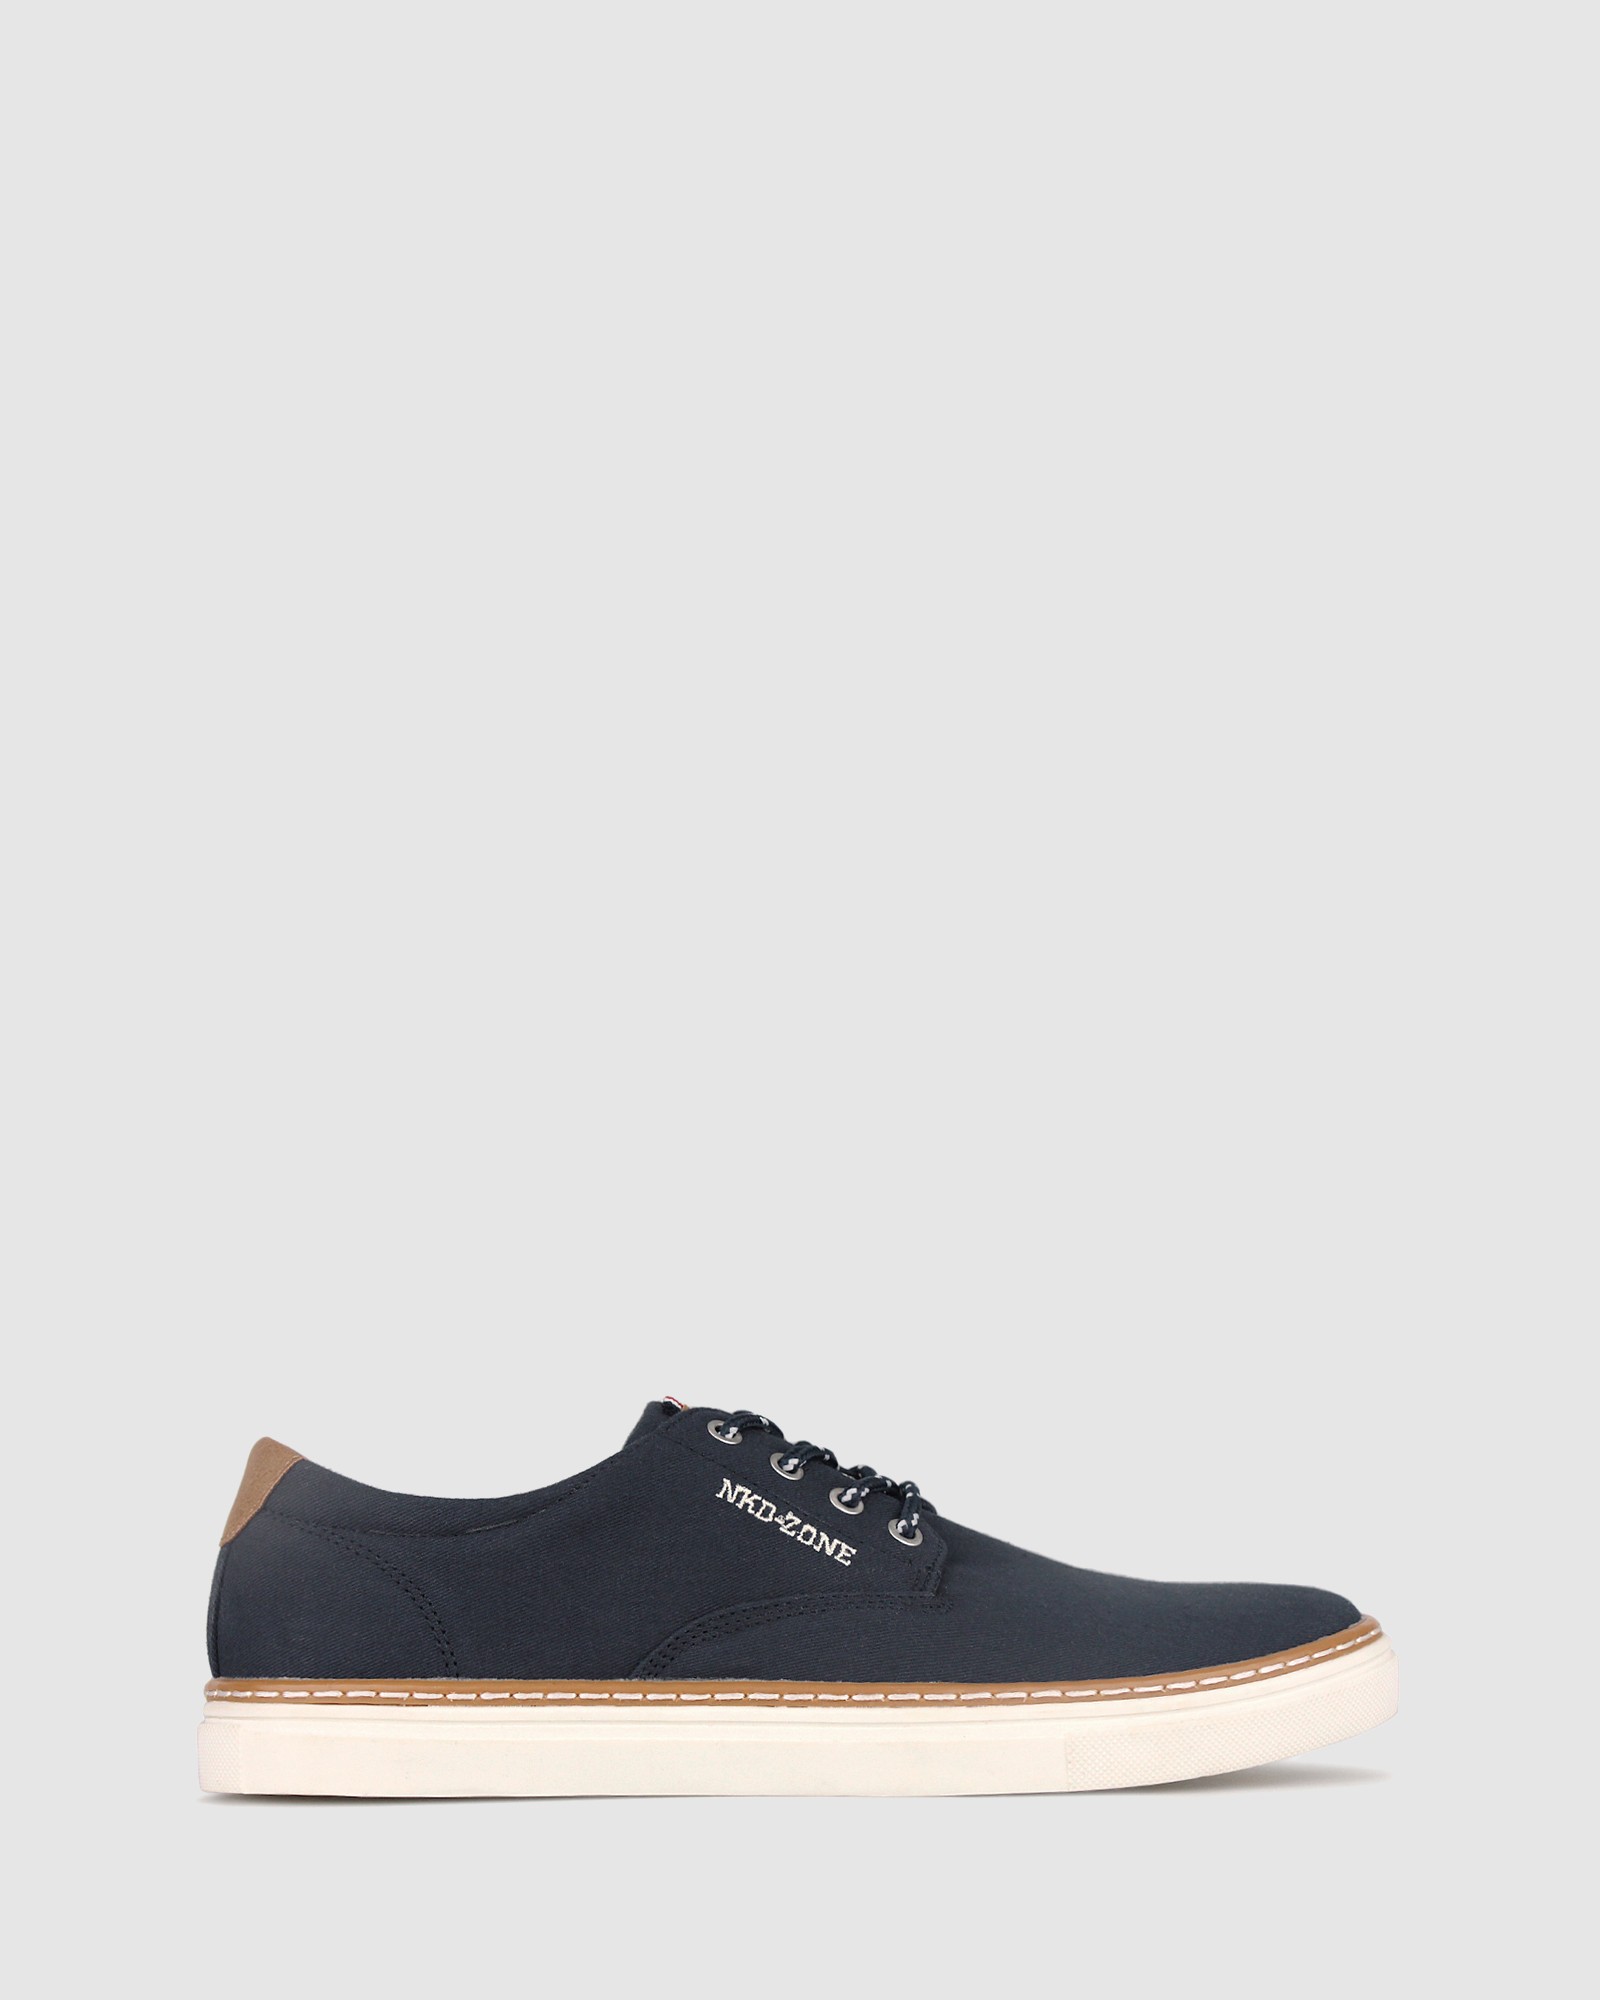 Otis Canvas Lifestyle Shoes Navy by Betts | ShoeSales